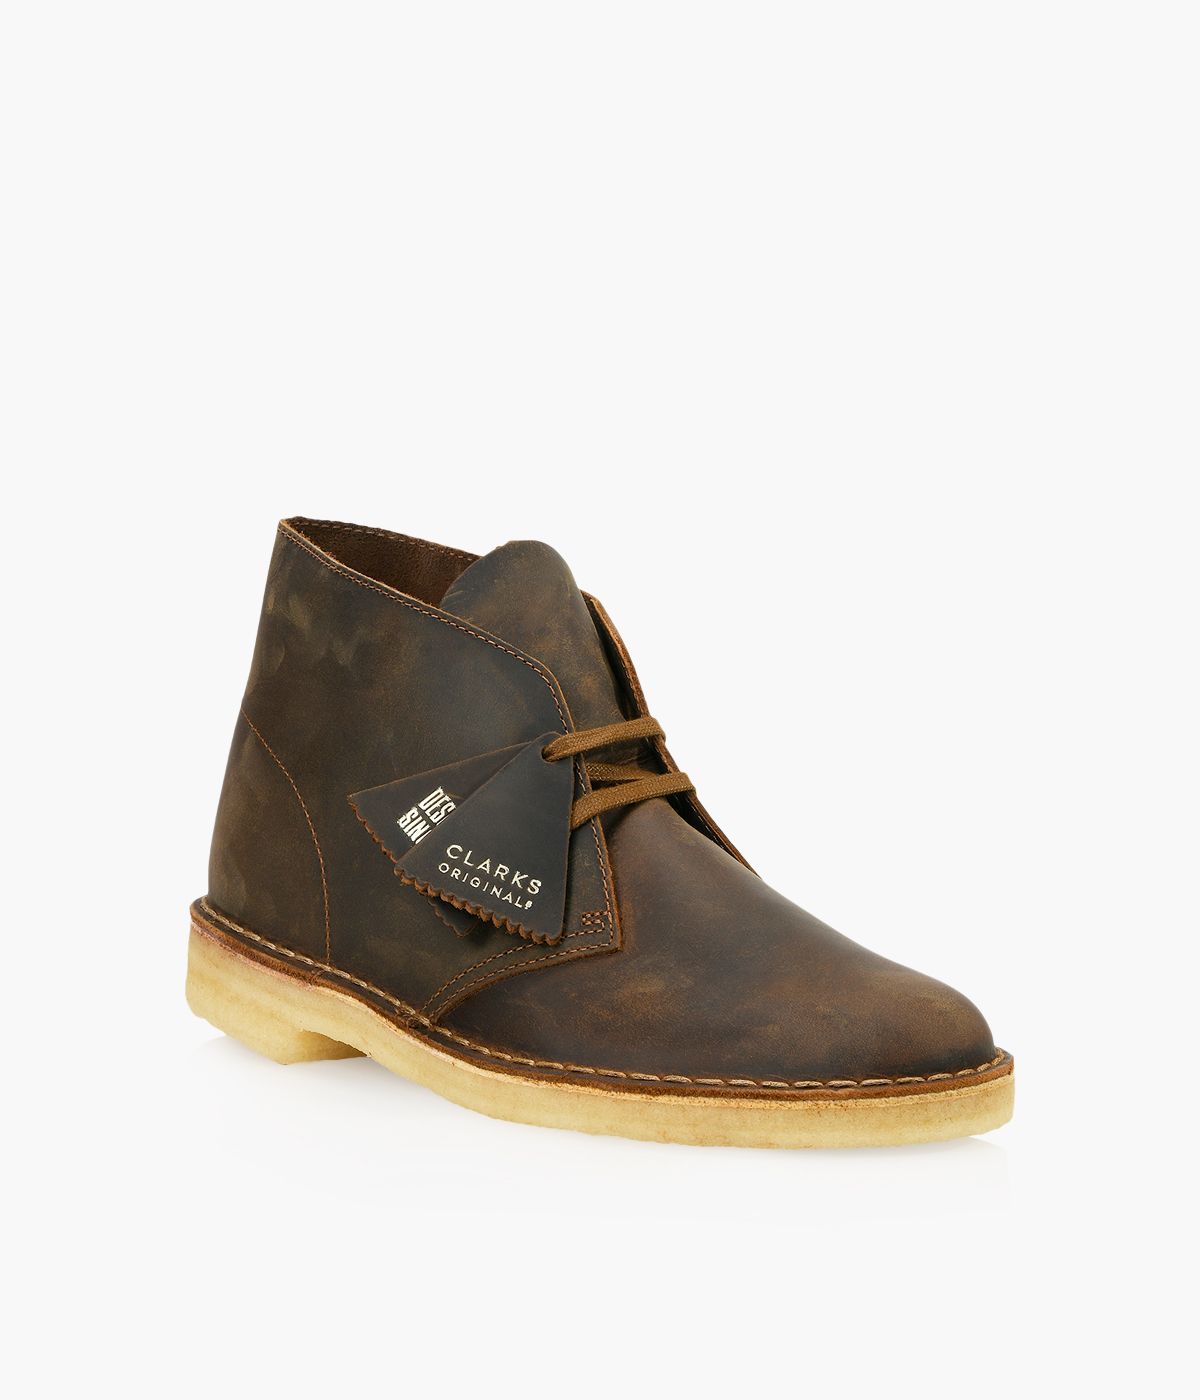 CLARKS DESERT BOOT - Suede | Browns Shoes